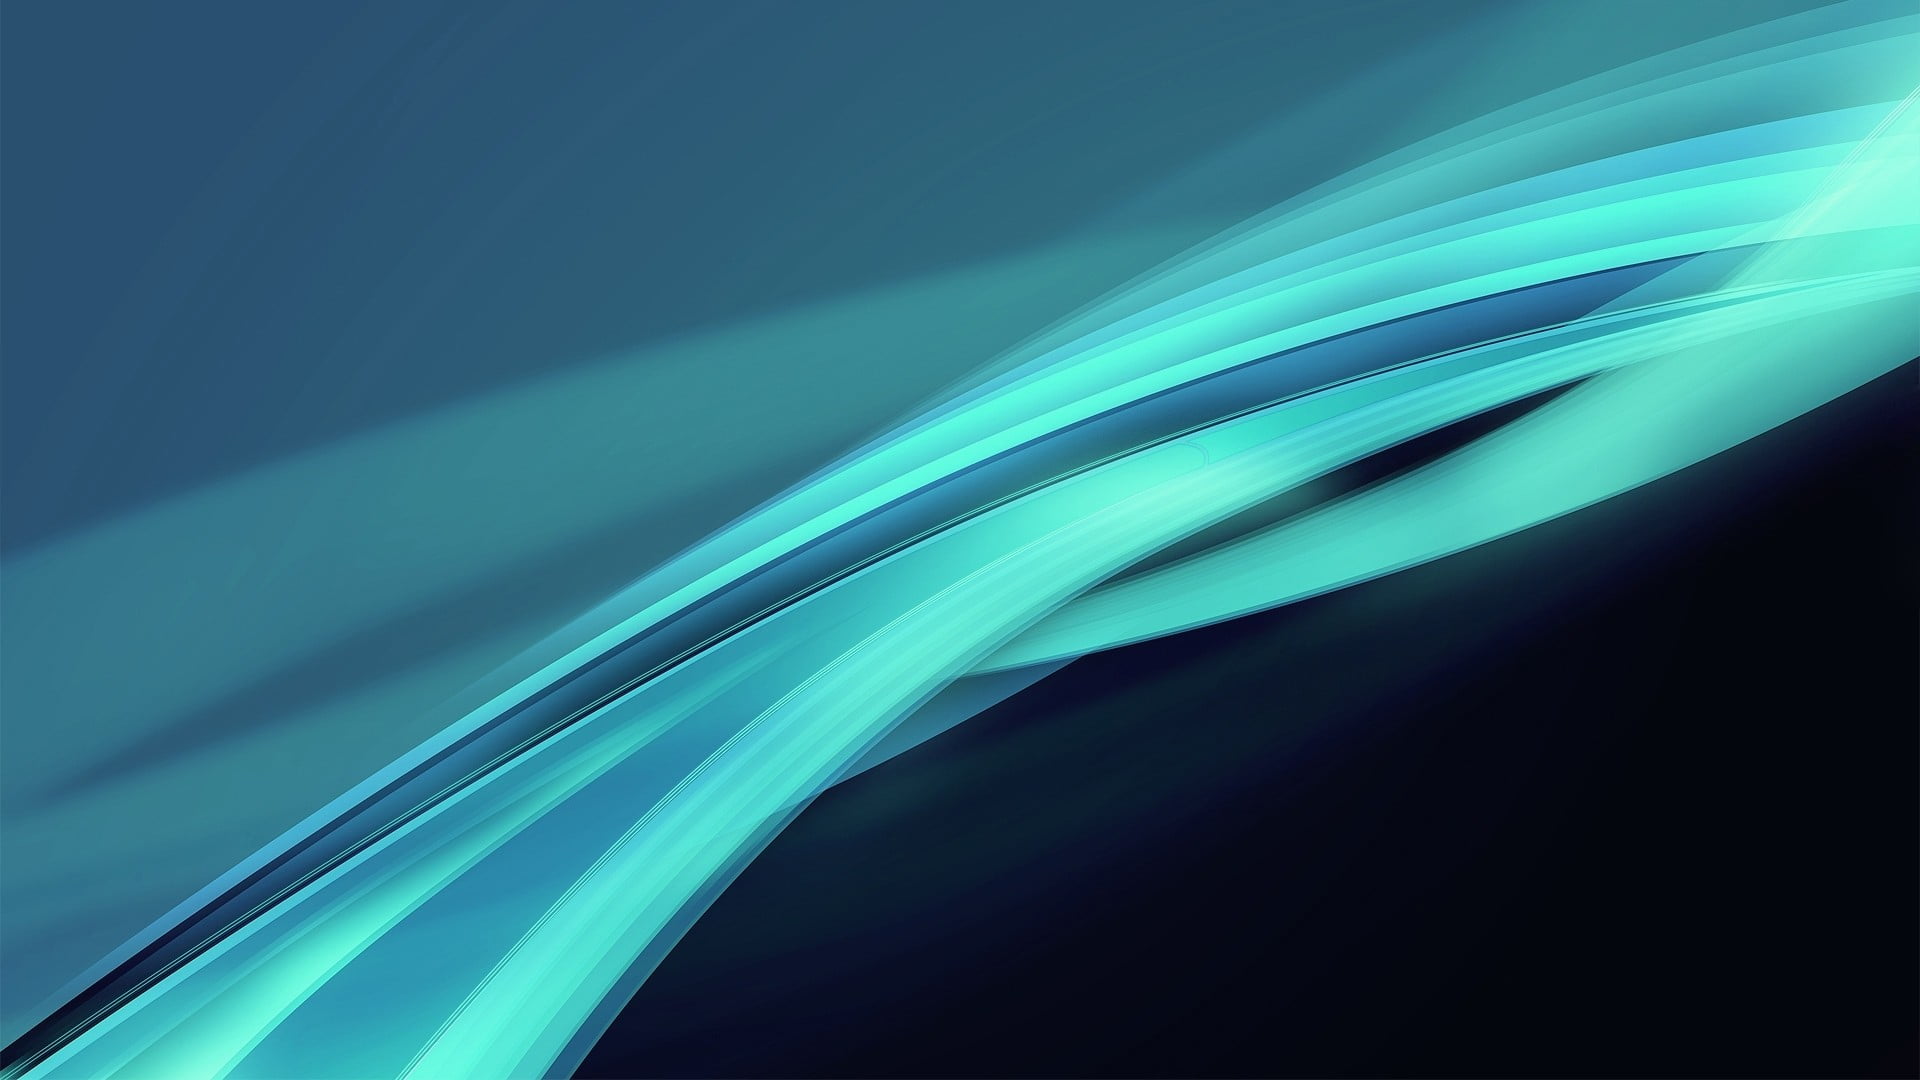 HD neon teal abstract wallpapers  Peakpx